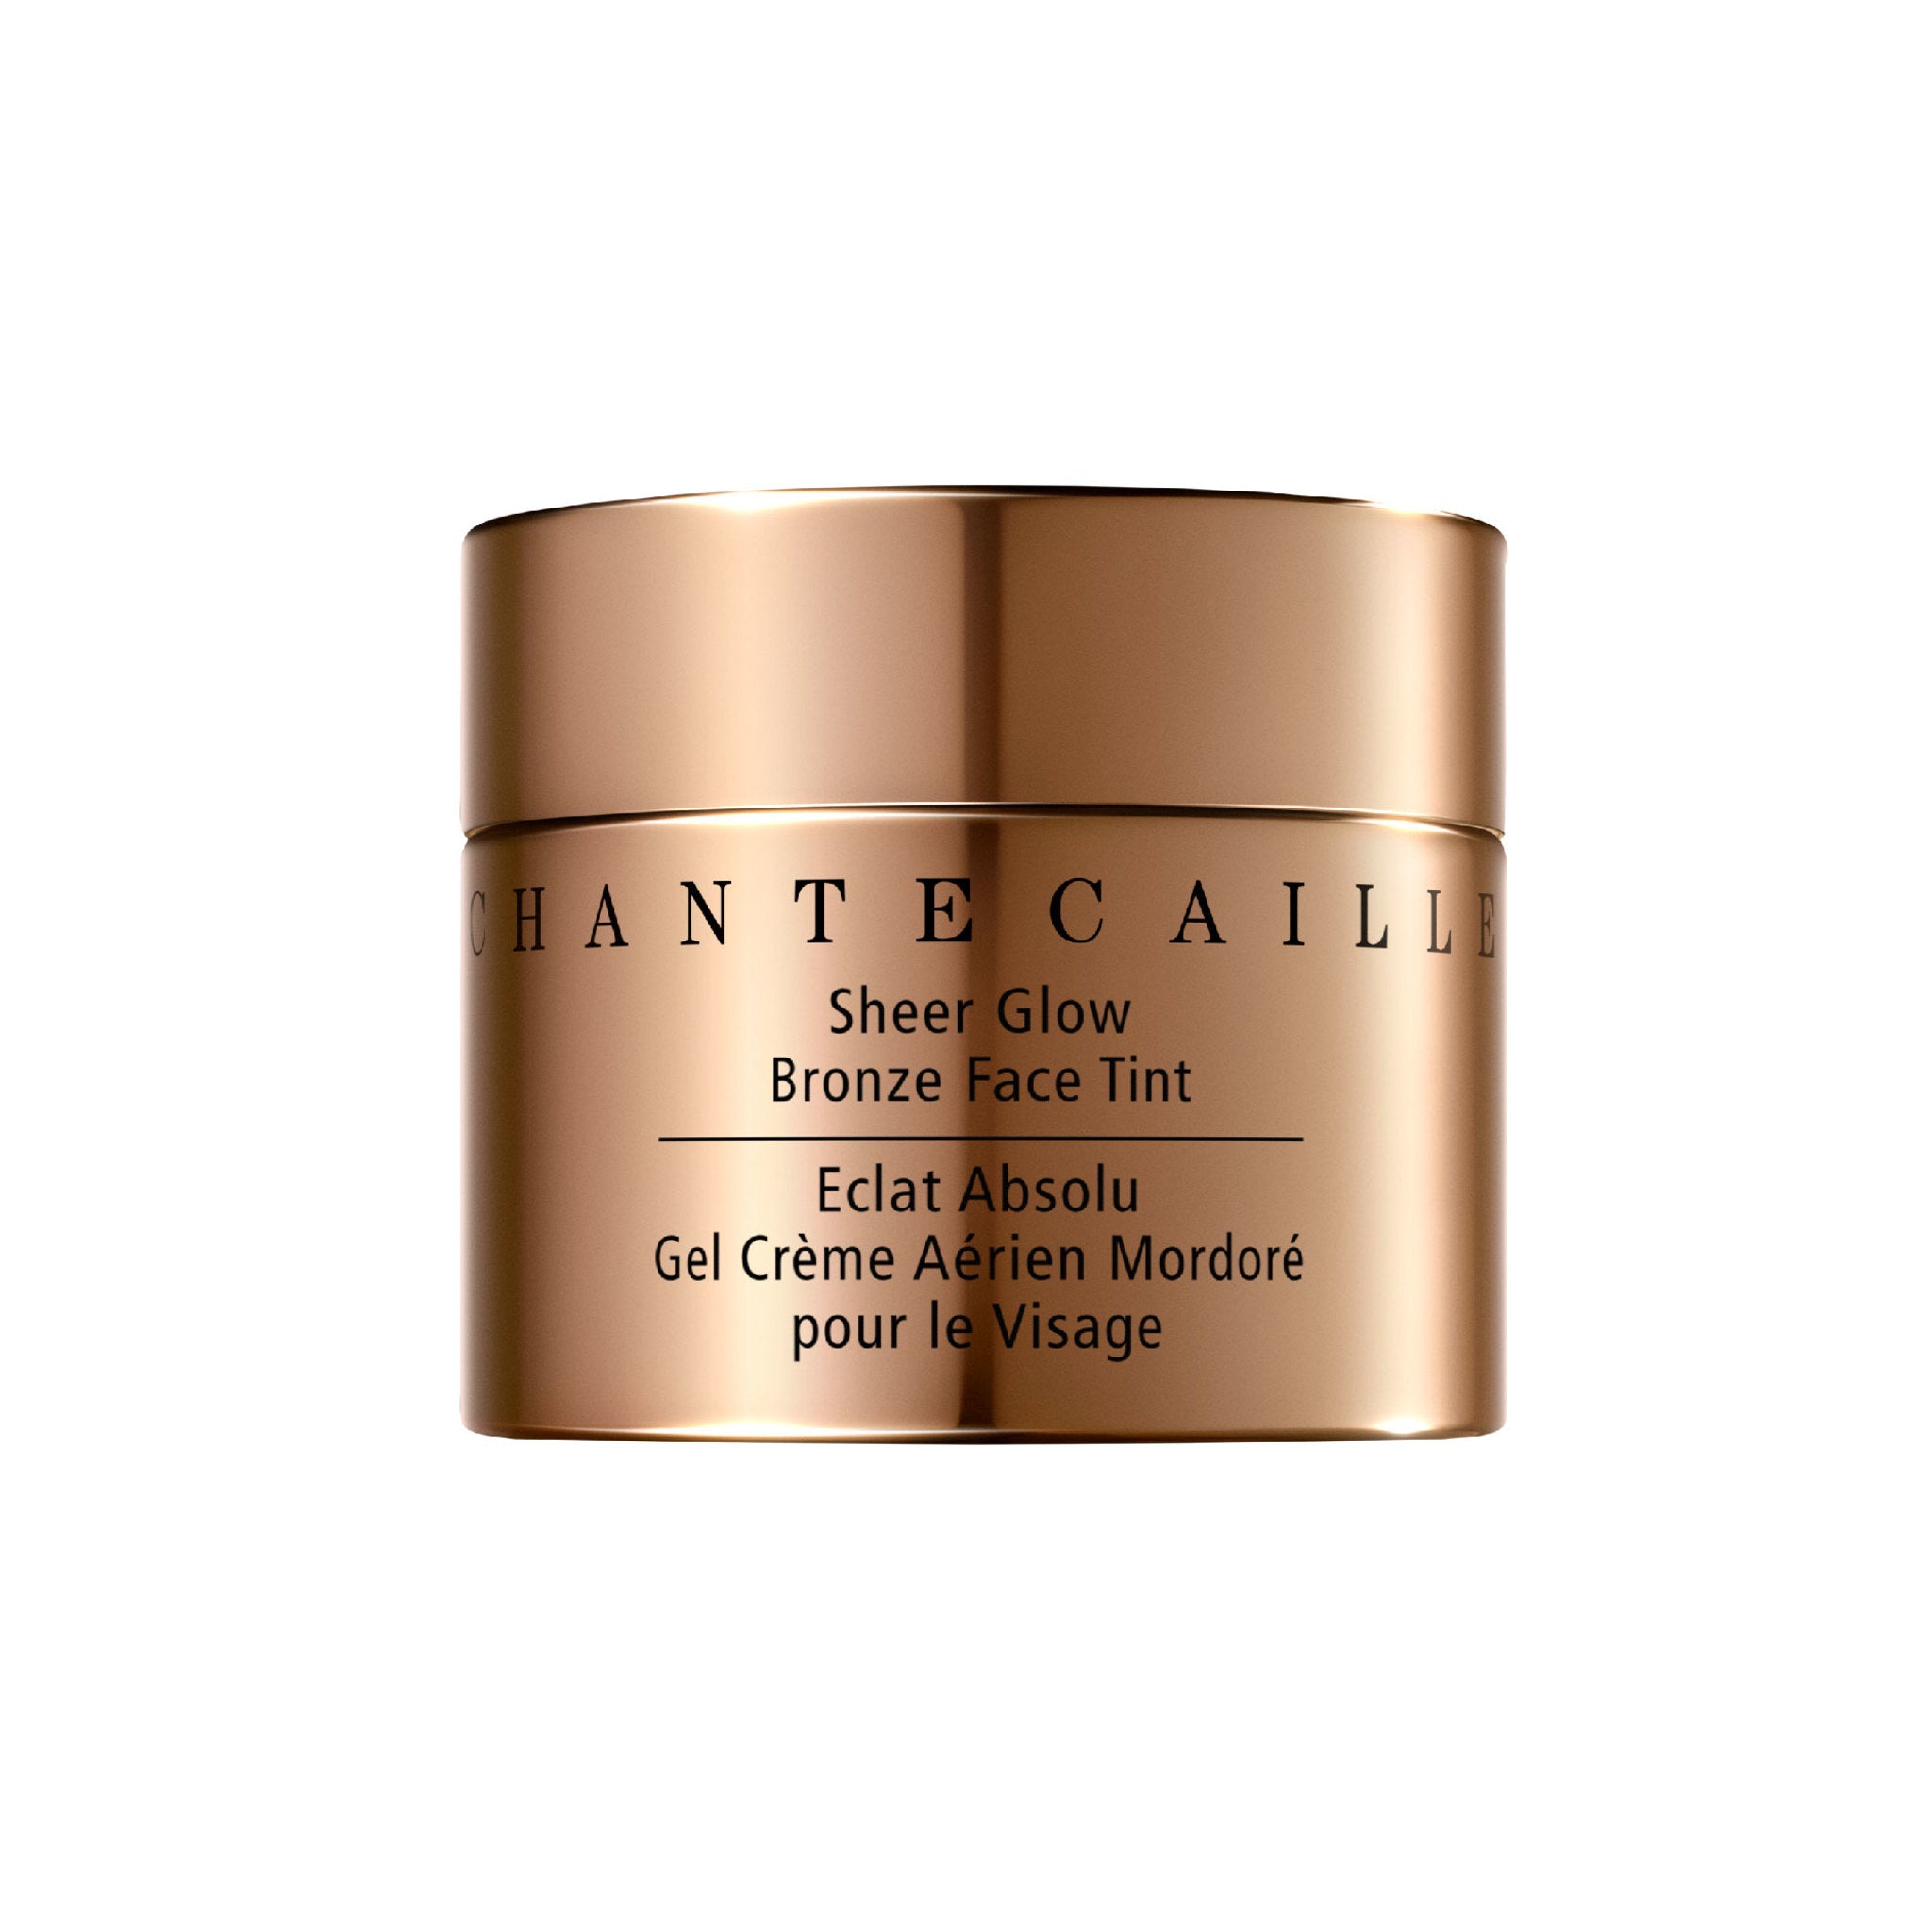 Chantecaille Sheer Glow Bronze Face Tint main image. This product is in the color bronze